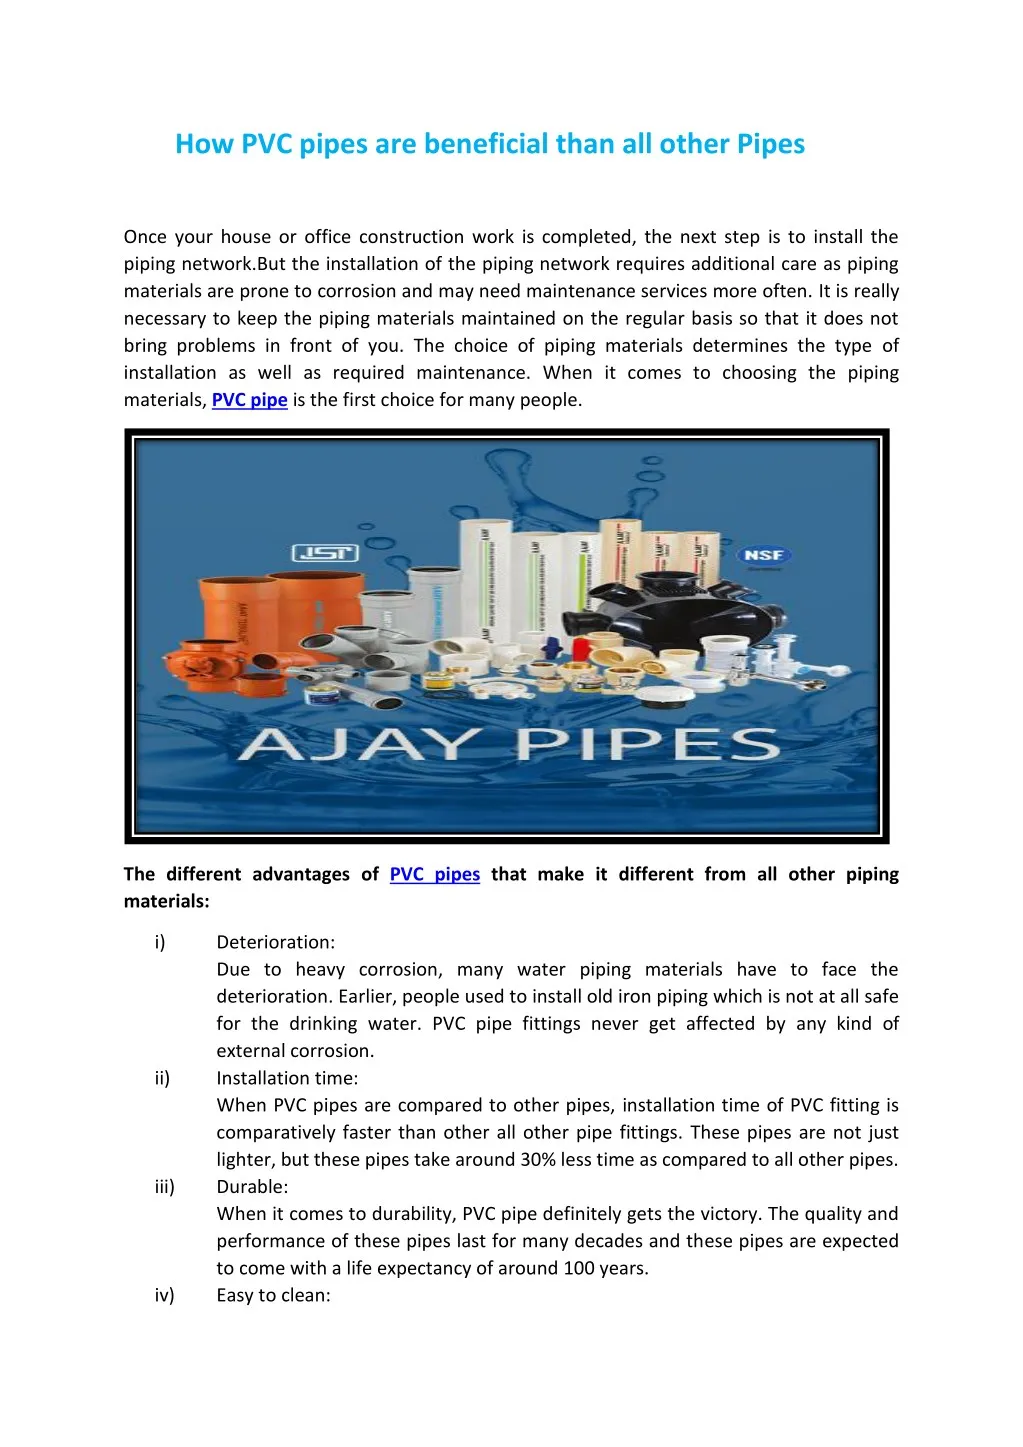 how pvc pipes are beneficial than all other pipes